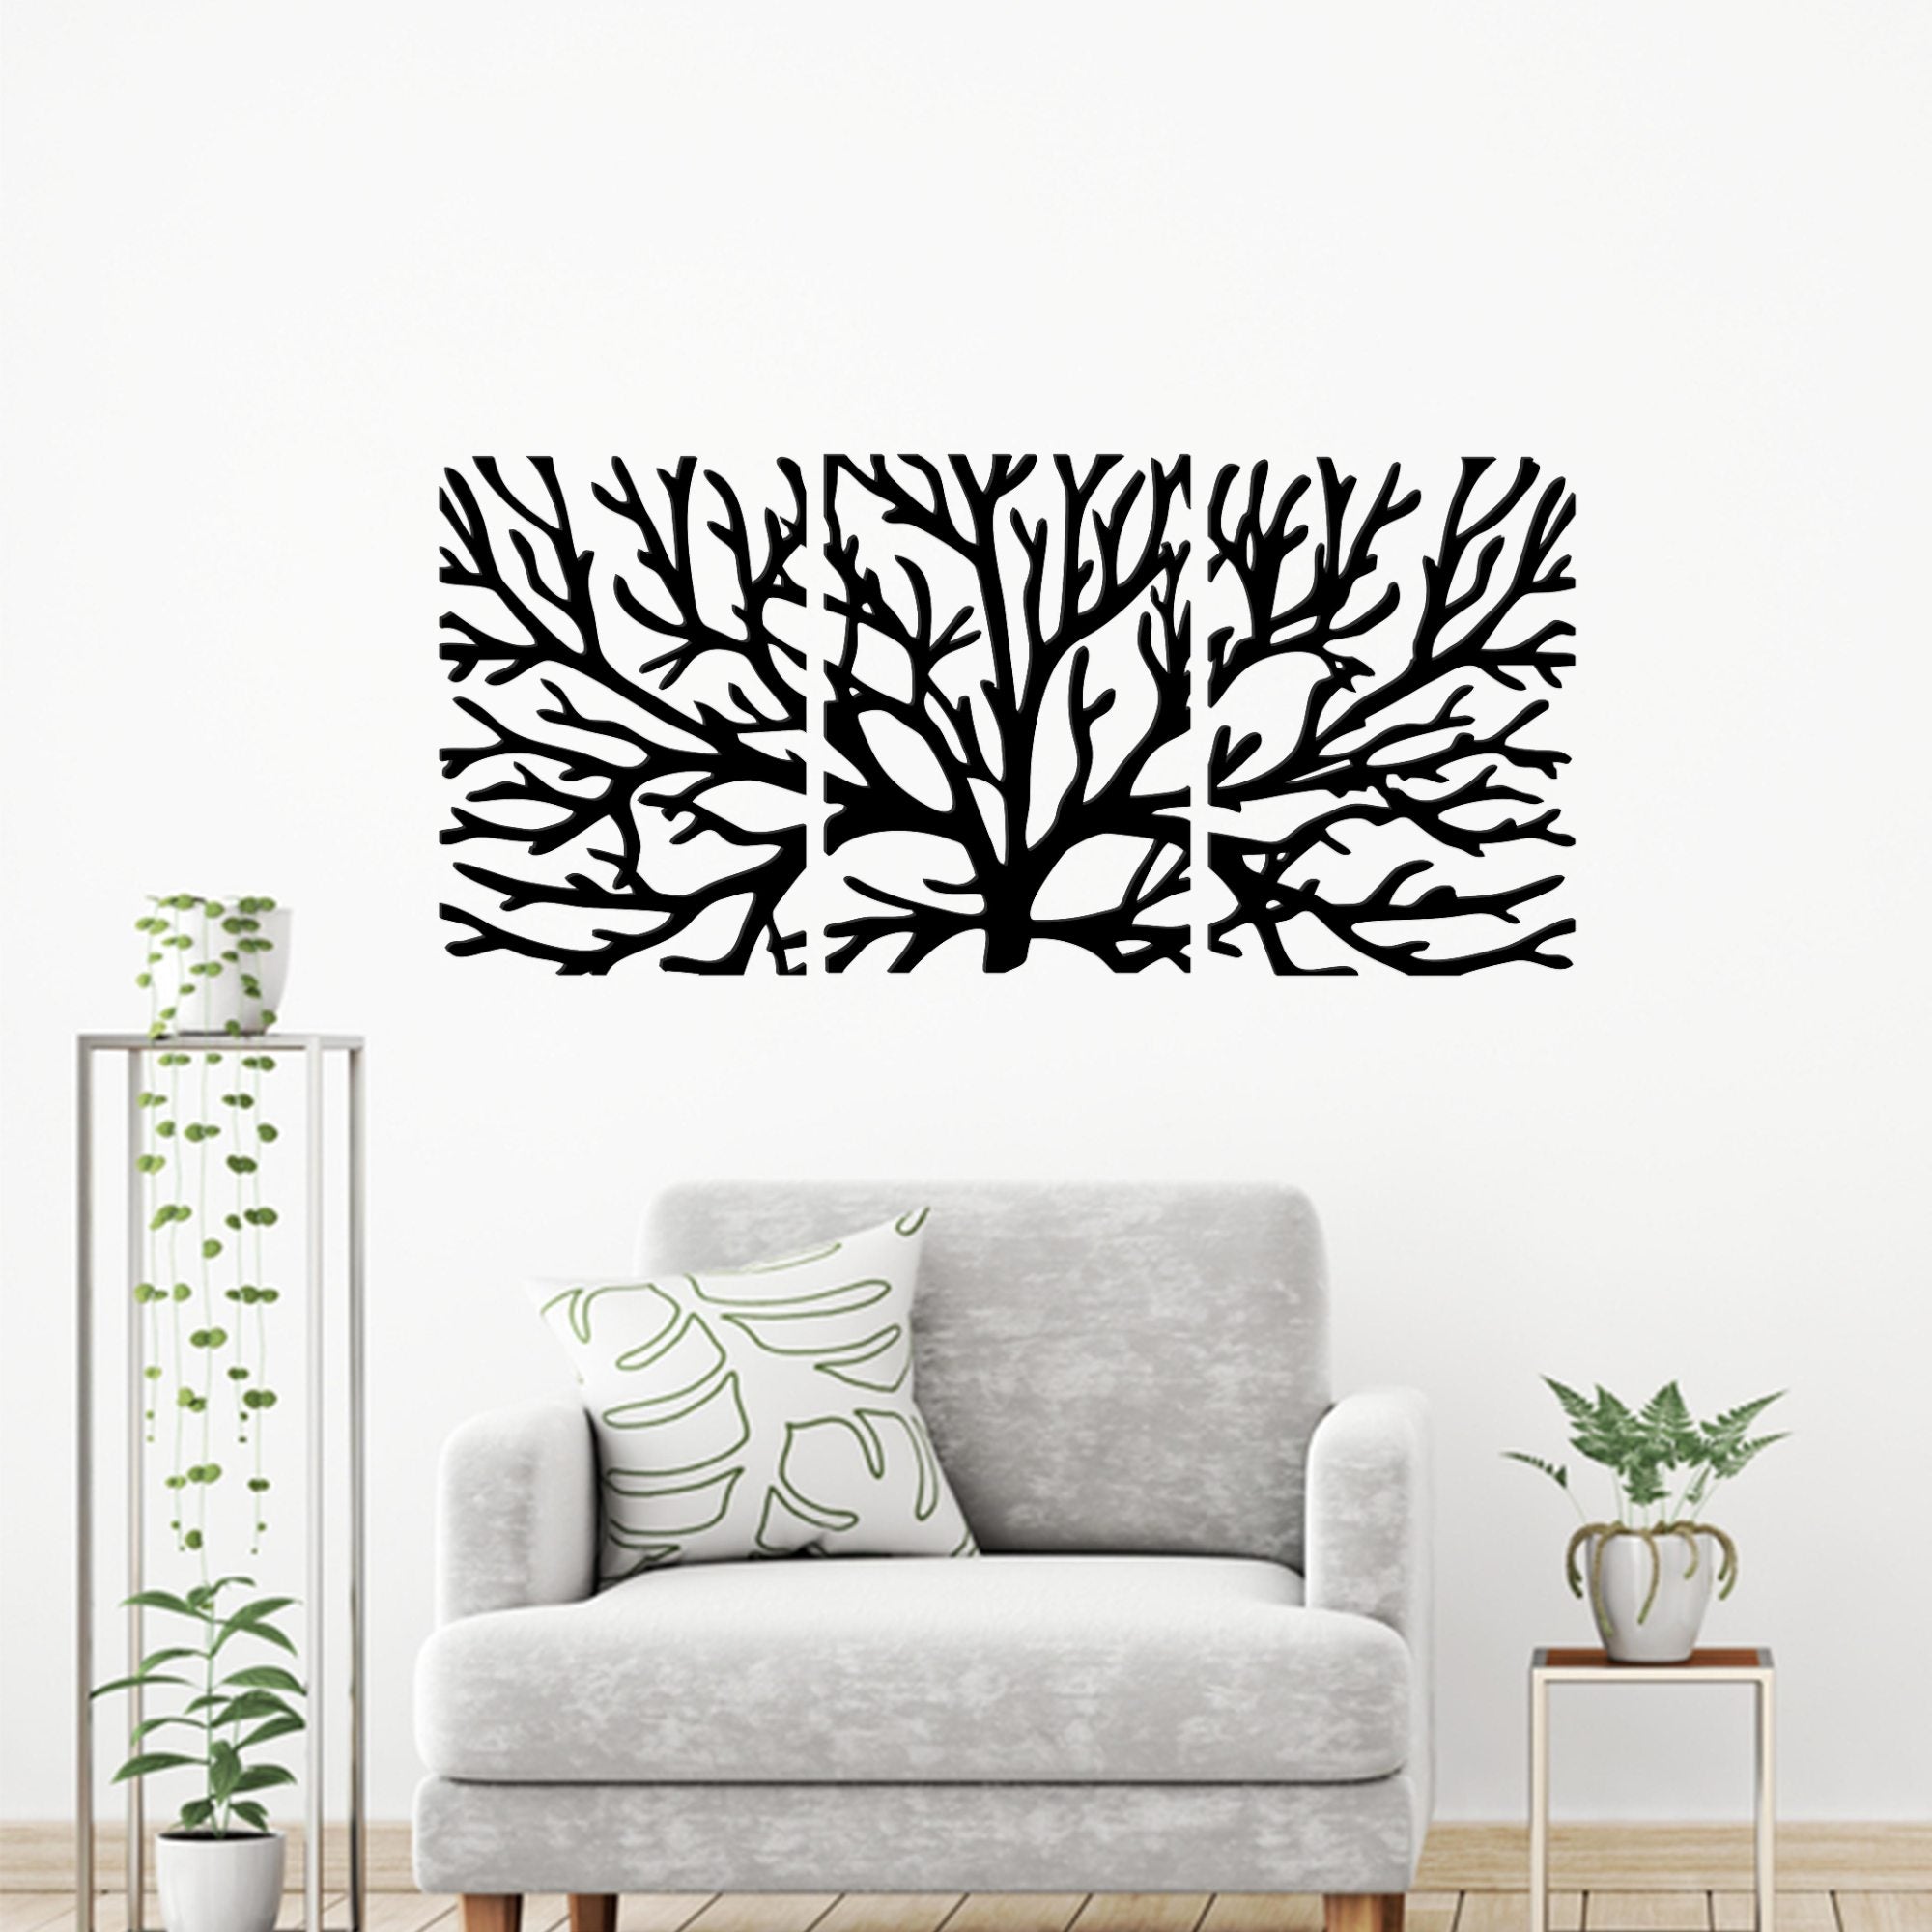 Wooden Wall Hanging of Beautiful Black Color Tree Branches